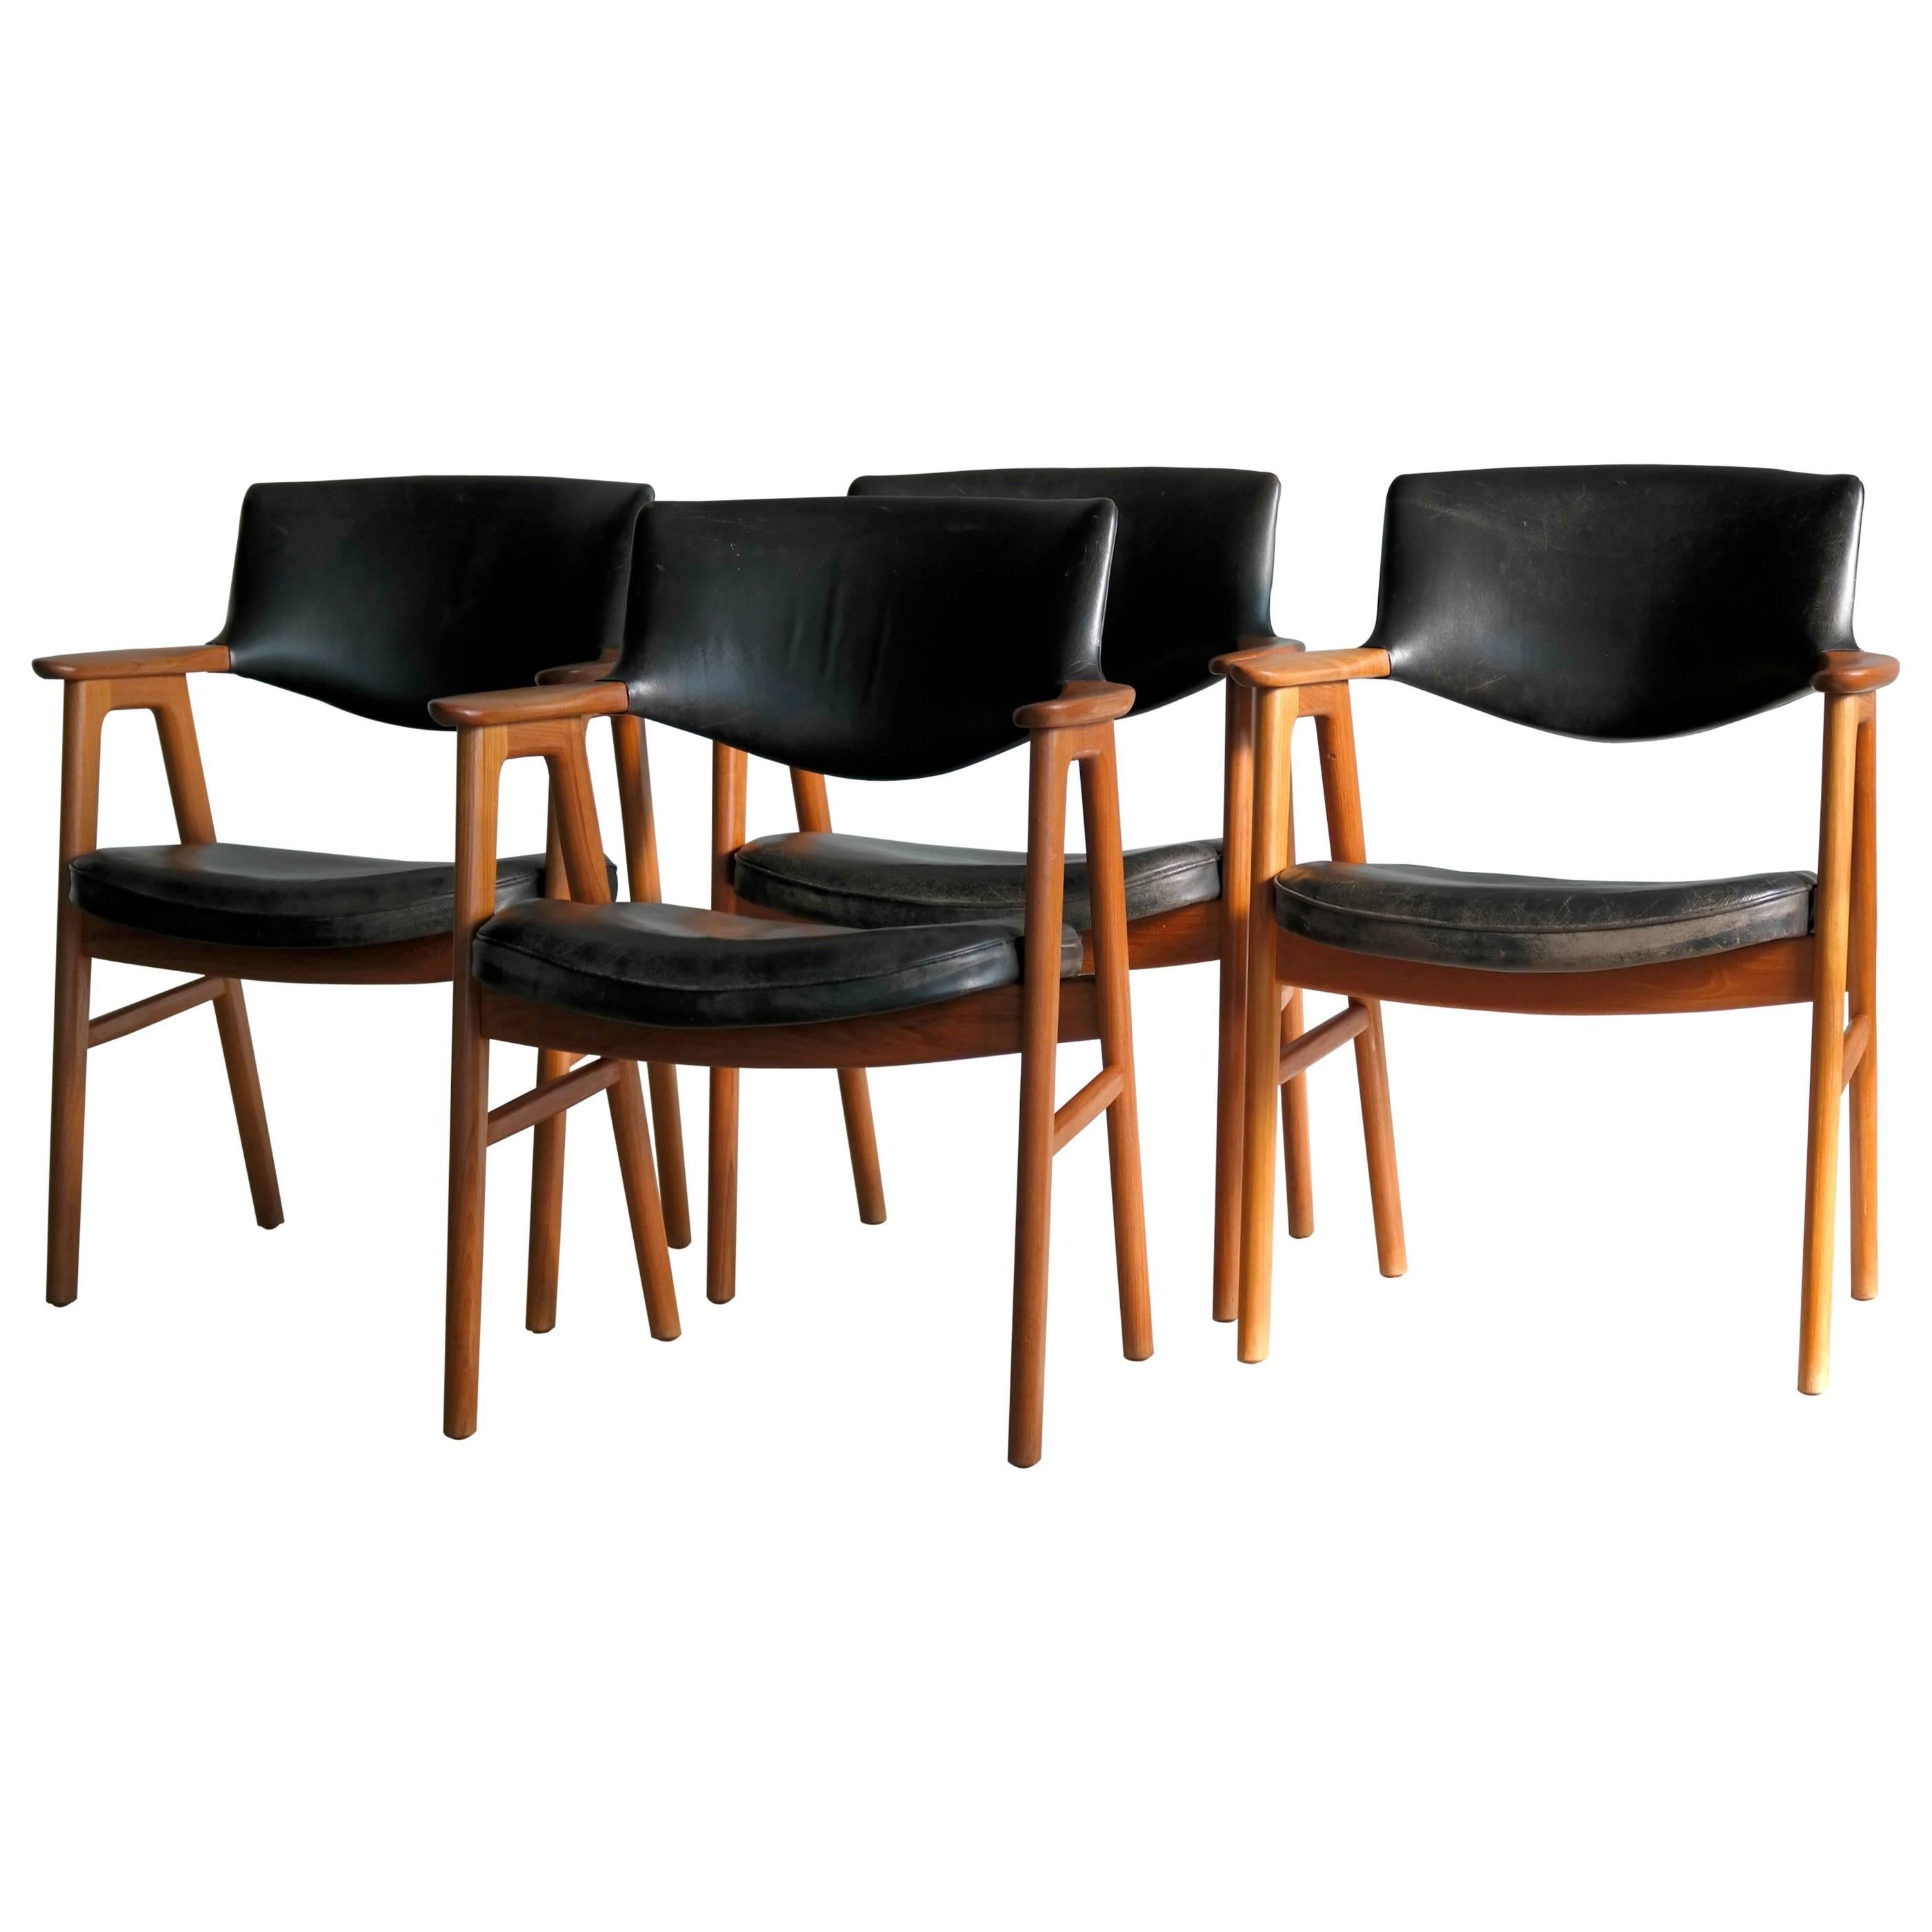  Erik Kirkegaard for Høng Set of 4 Dining Chairs in Teak and Leather  